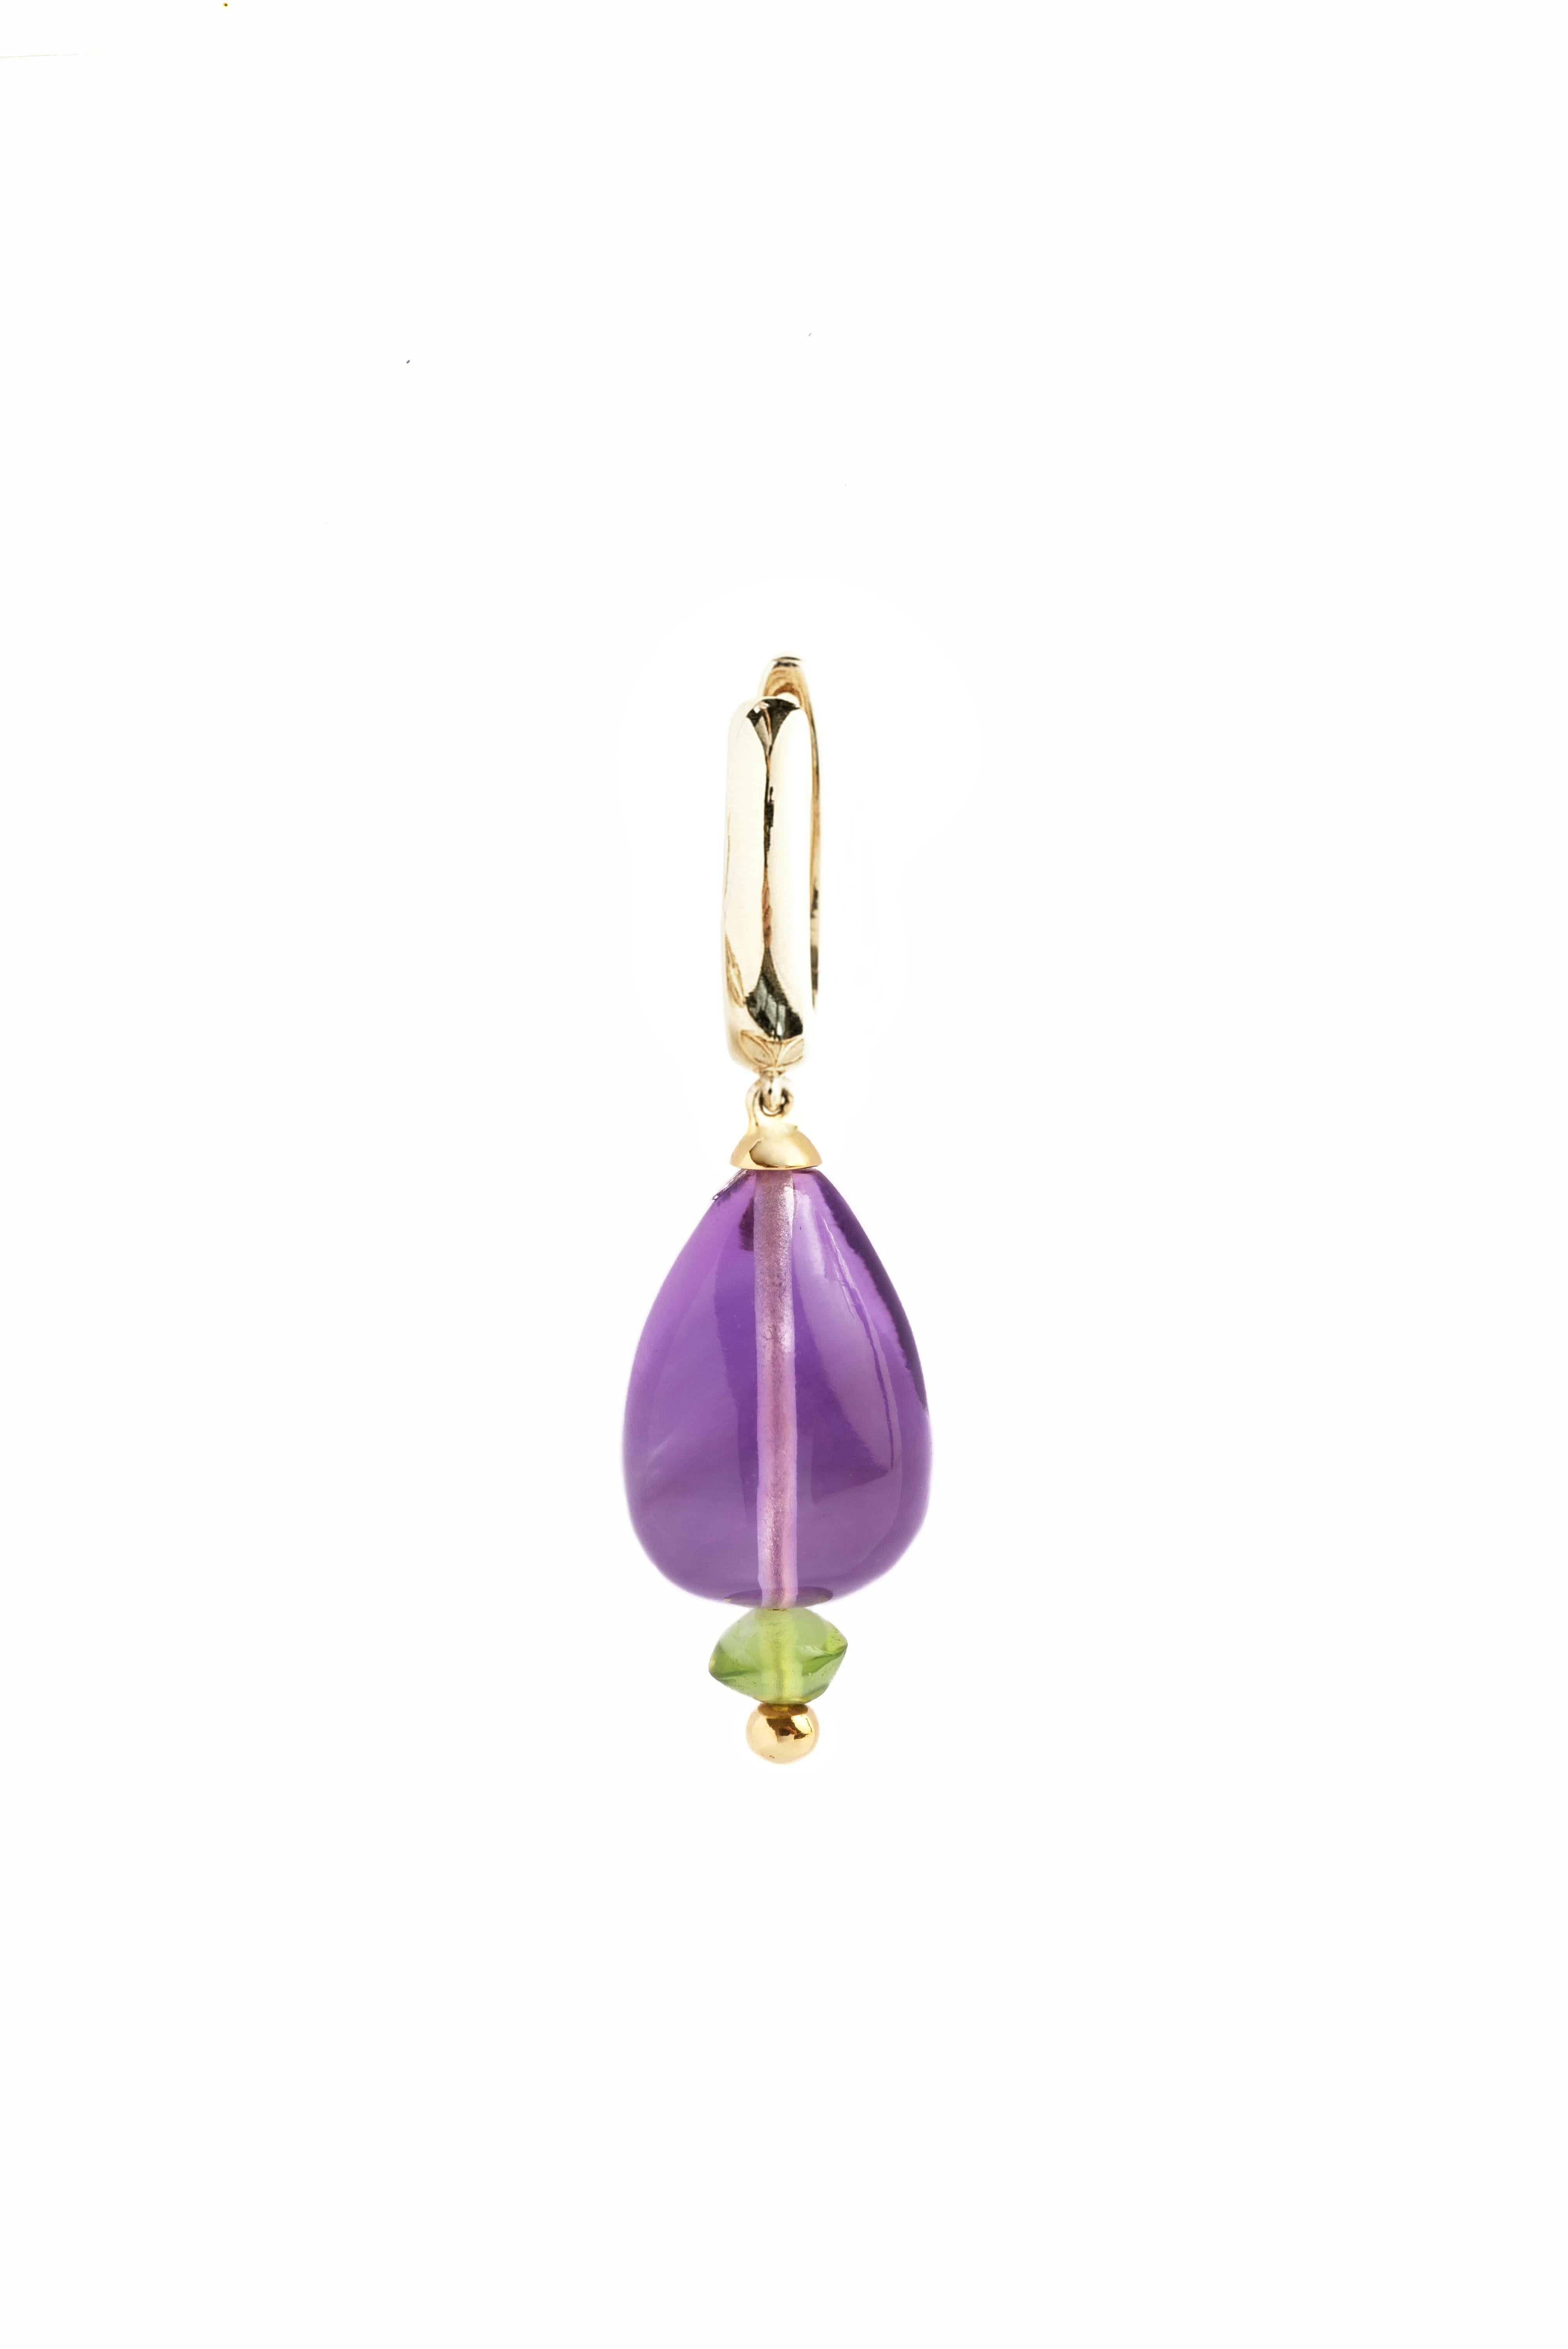 Introducing our Amethyst Drop and Peridot earrings, specially crafted for the modern woman seeking elegance and sophistication. These exquisite earrings feature stunning Amethyst drops accompanied by a Peridot and a gold bead, creating a striking